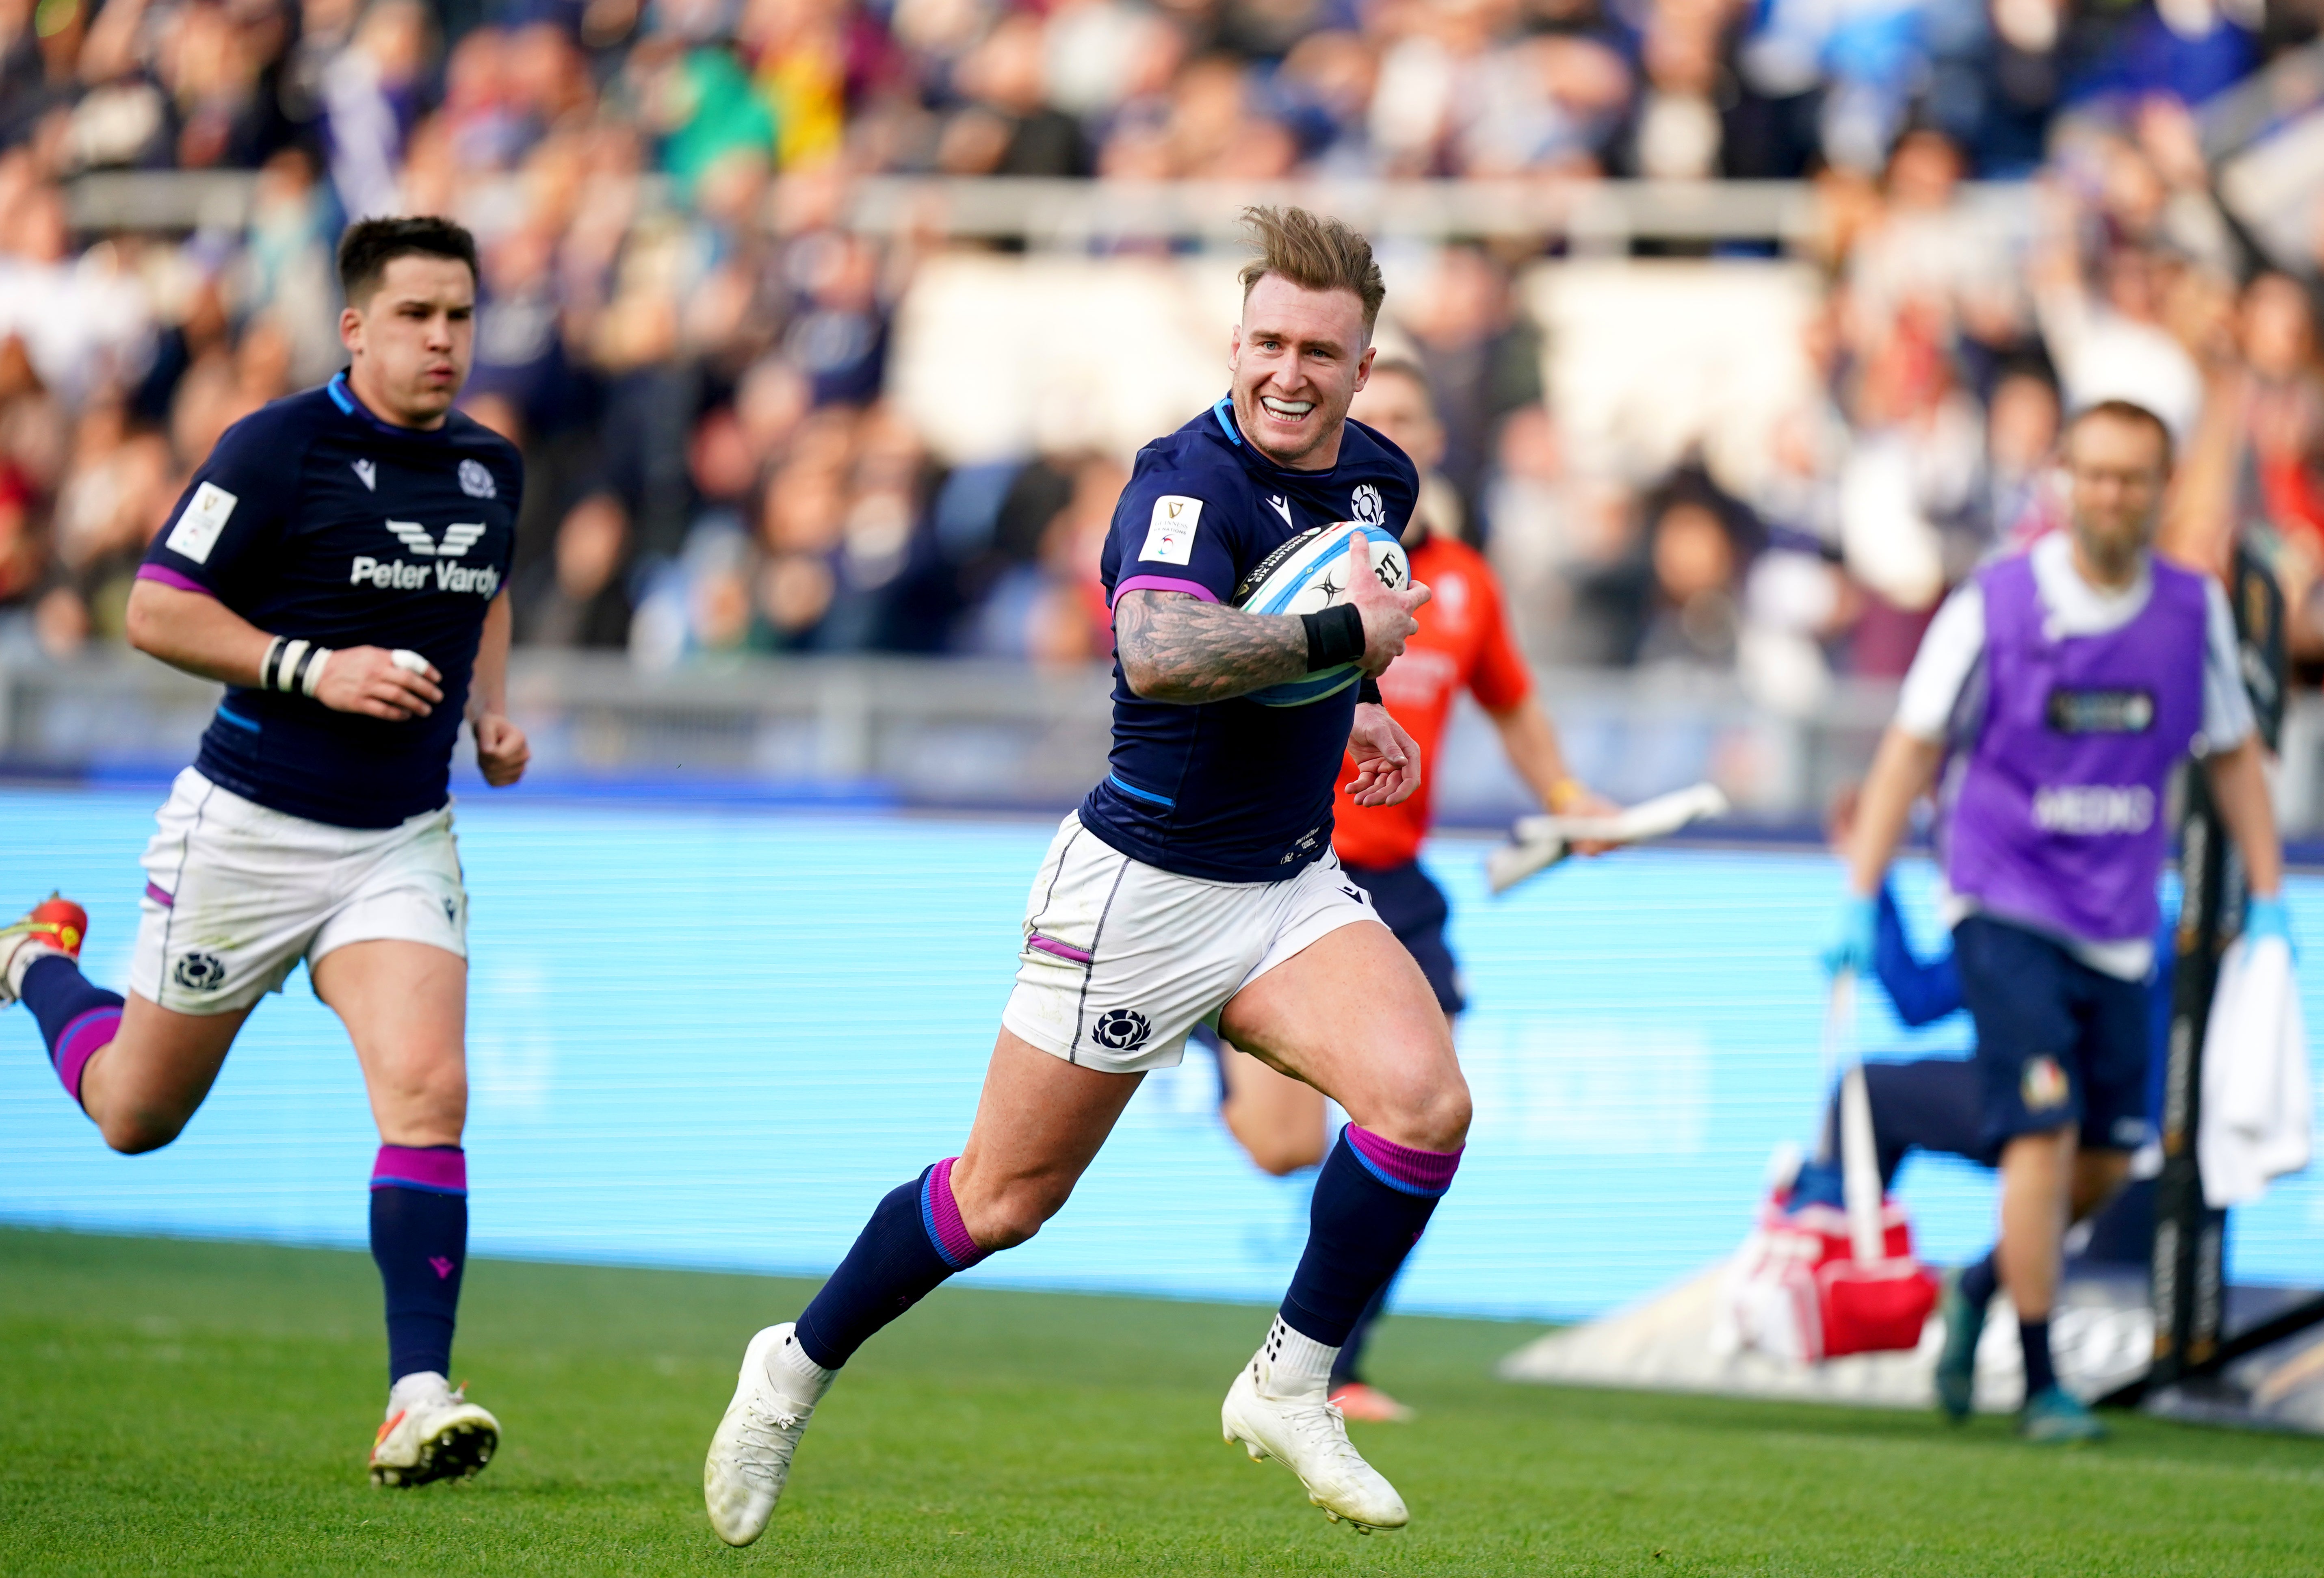 Stuart Hogg scored Scotland’s fifth try in a 33-22 win over Italy in Rome (Mike Egerton/PA)